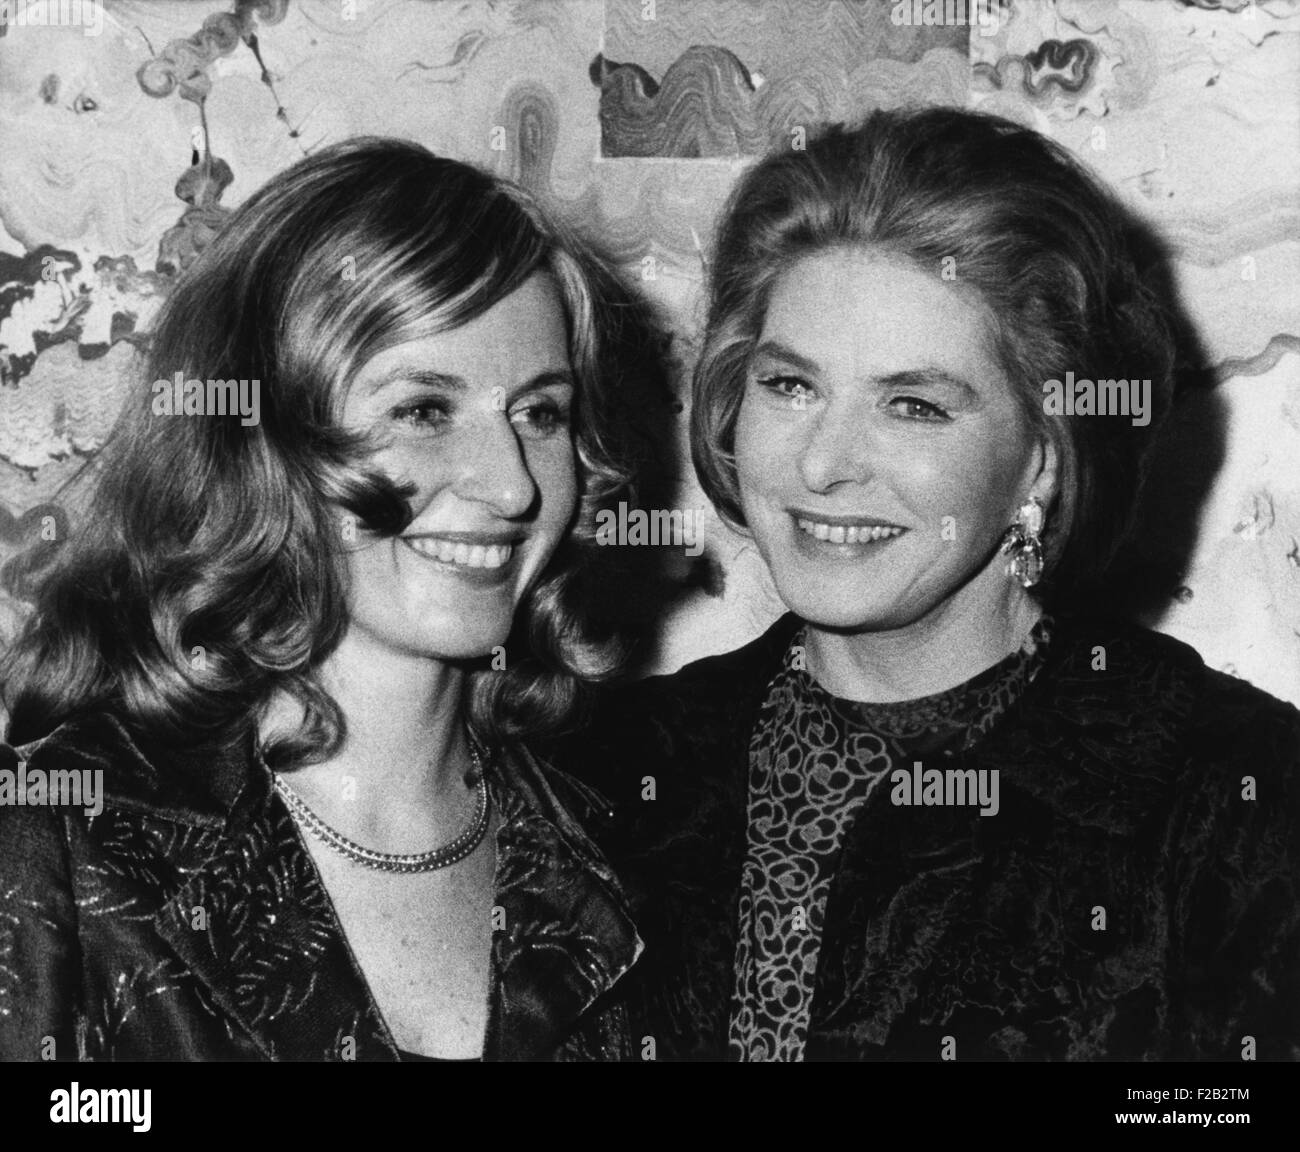 Ingrid Bergman with her daughter Pia Lindstrom Daly, backstage at the Ethel Barrymore Theatre. April 17, 1972. It was opening night of Bernard Shaw’s CAPTAIN BASSBOUNDS CONVERSION, at the Ethel Barrymore Theatre, New York. (CSU 2015 7 333) Stock Photo